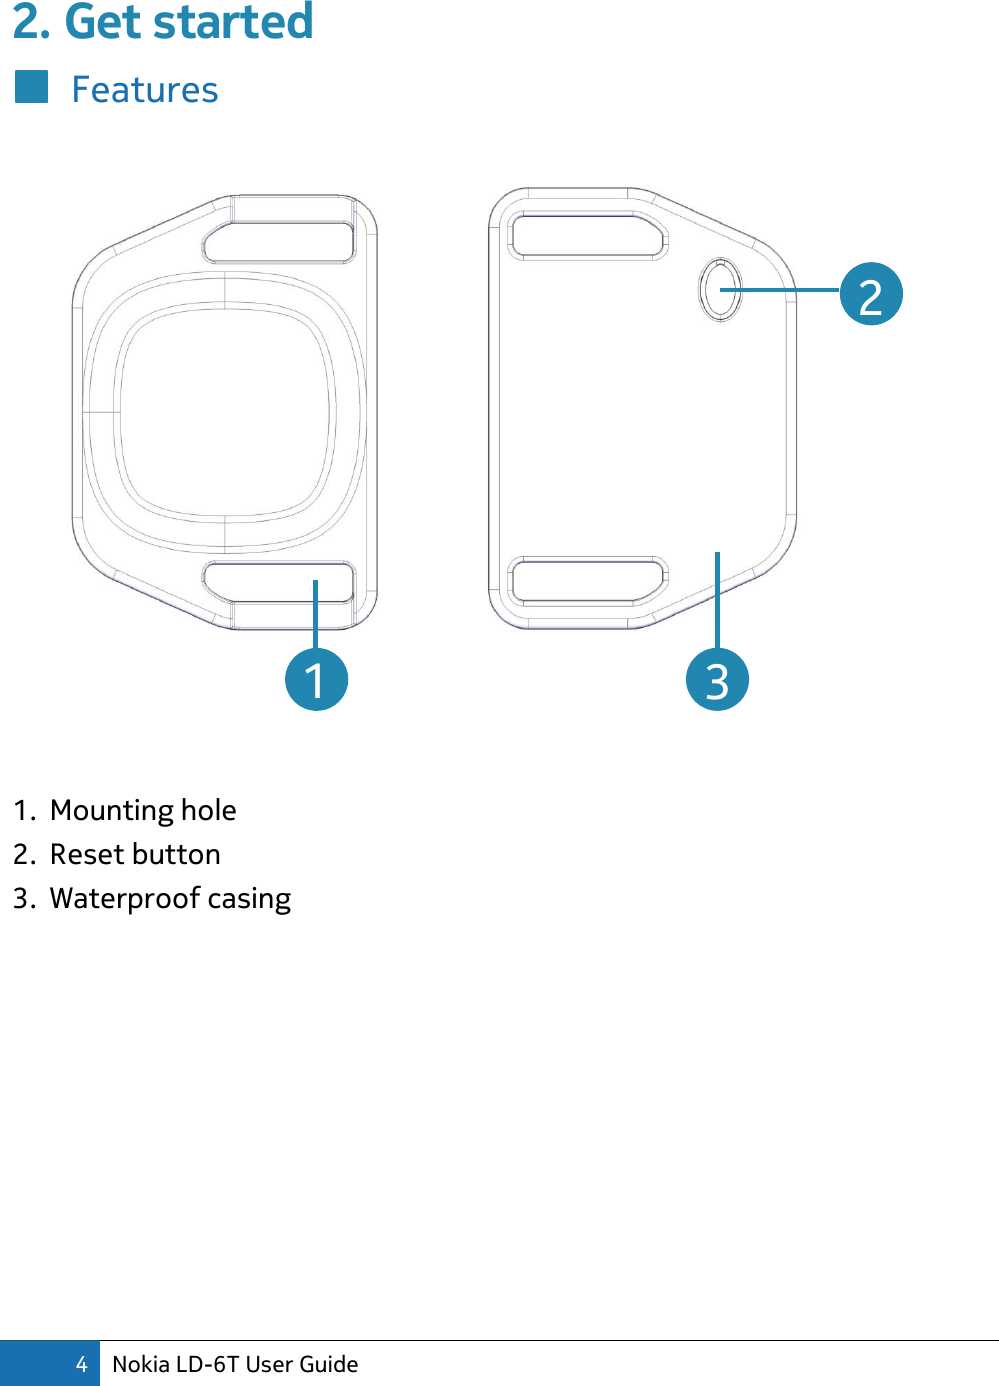 4 Nokia LD-6T User Guide  2. Get started Features     1. Mounting hole 2. Reset button 3. Waterproof casing    2  3  1 